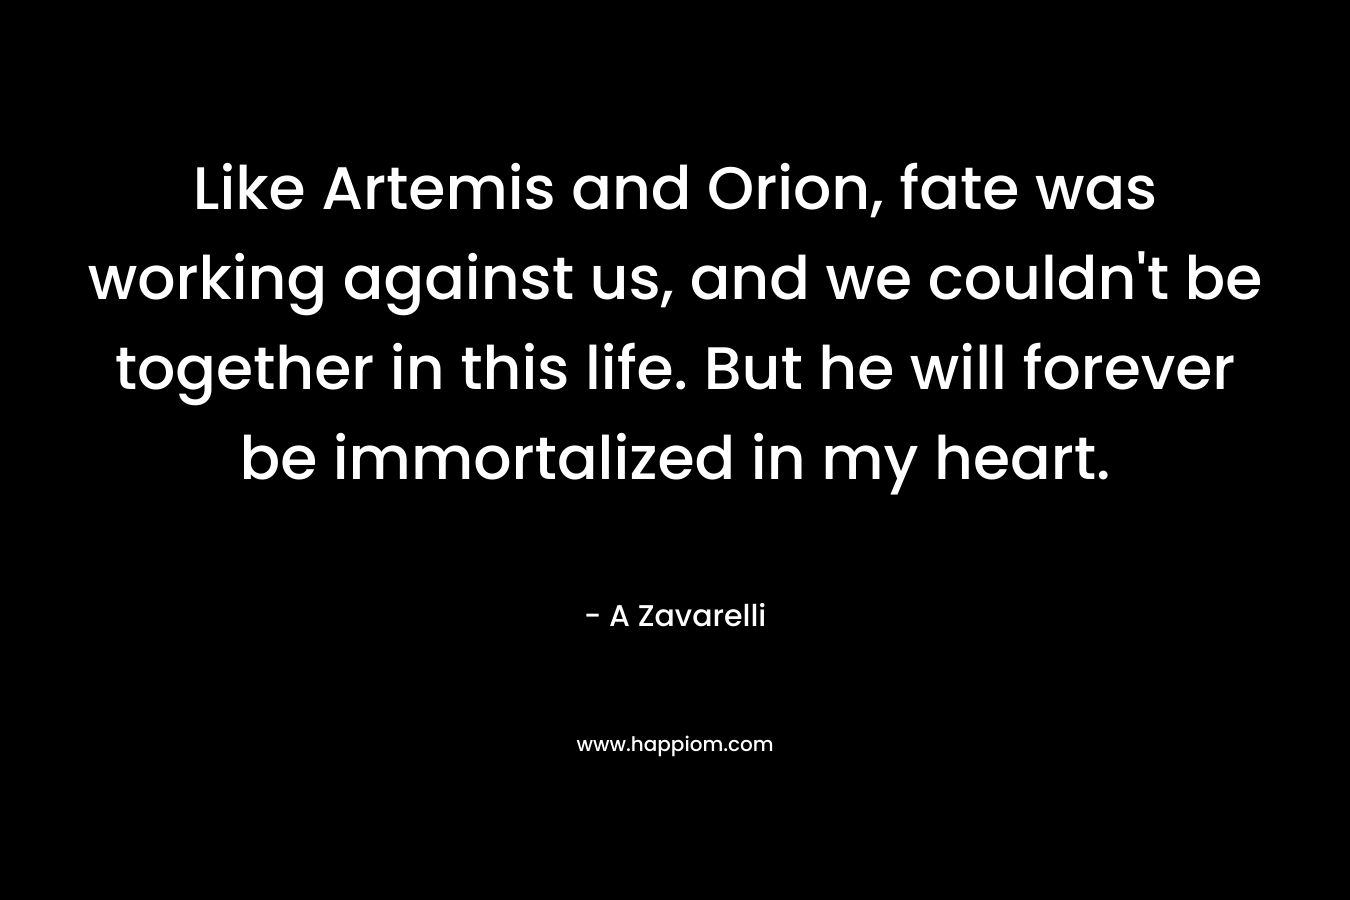 Like Artemis and Orion, fate was working against us, and we couldn't be together in this life. But he will forever be immortalized in my heart.